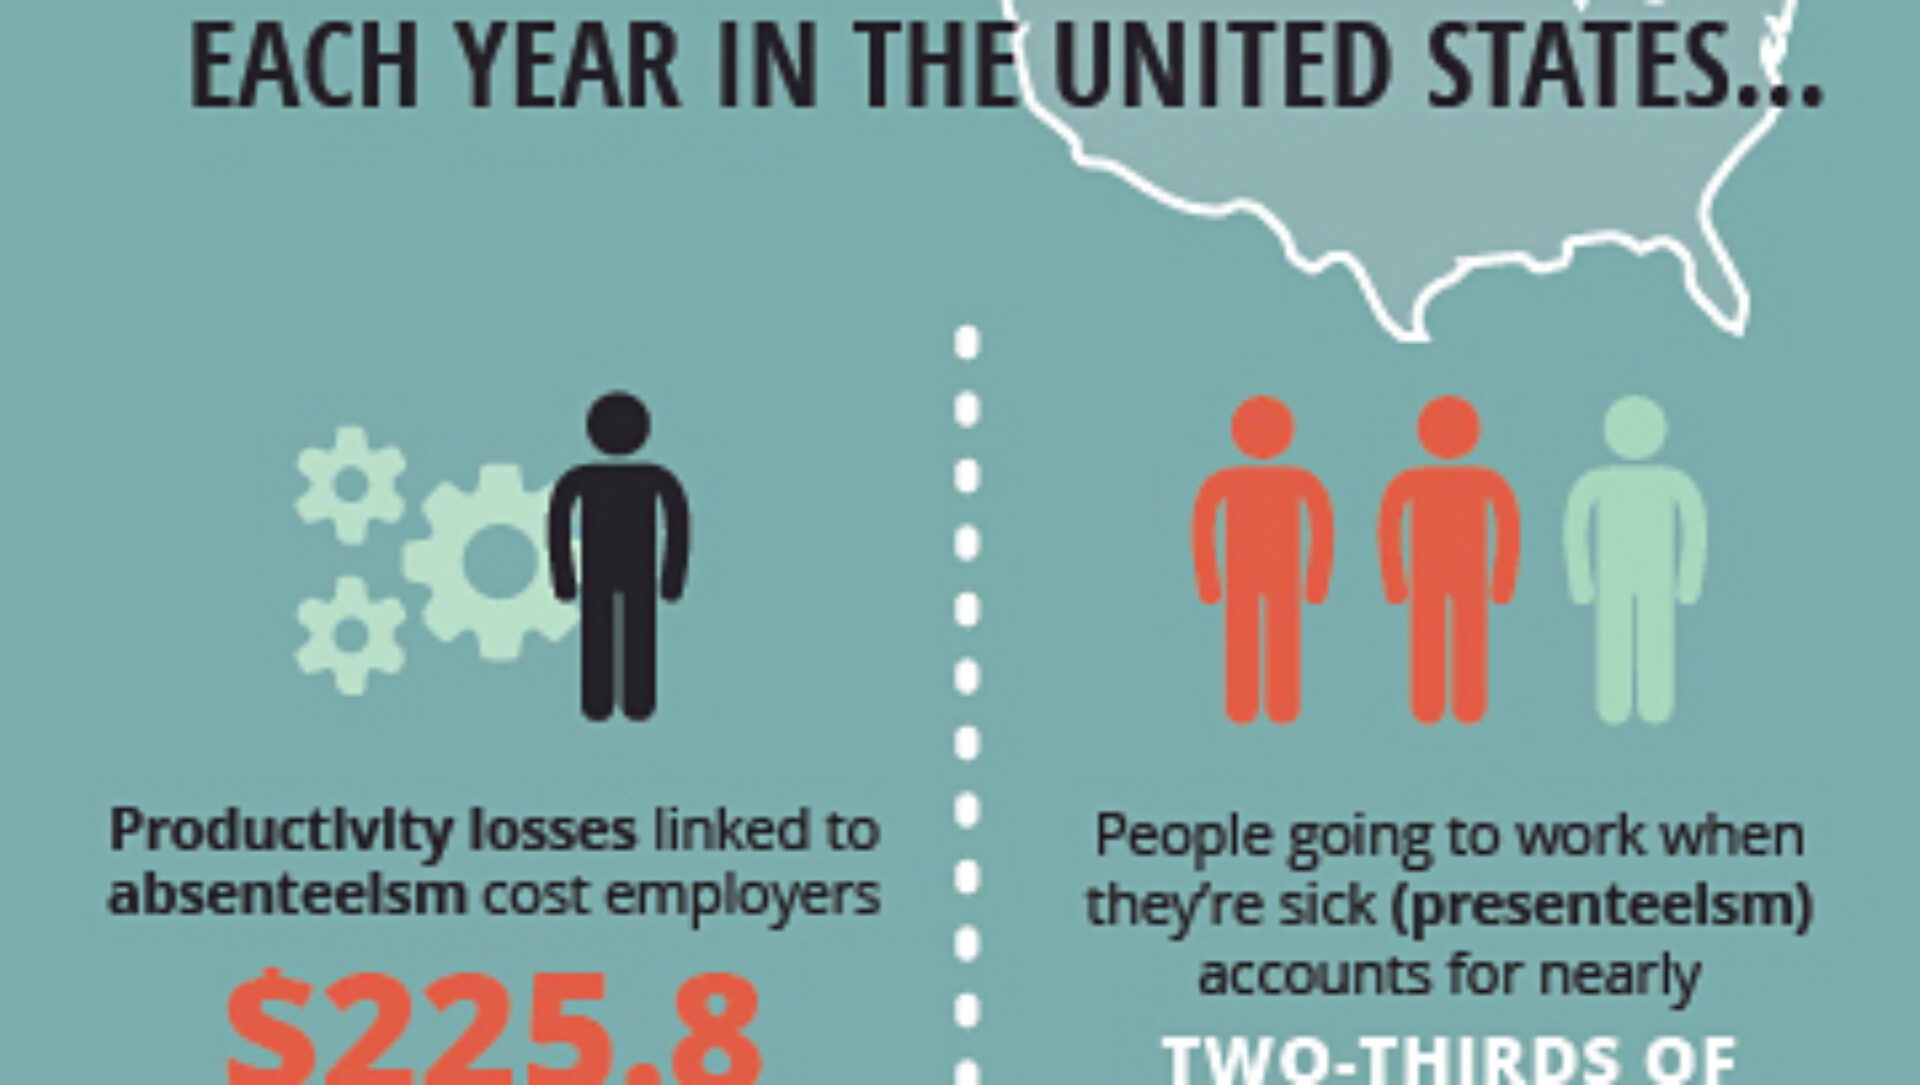 CDC - Business Pulse Infographic on employee health and productivity